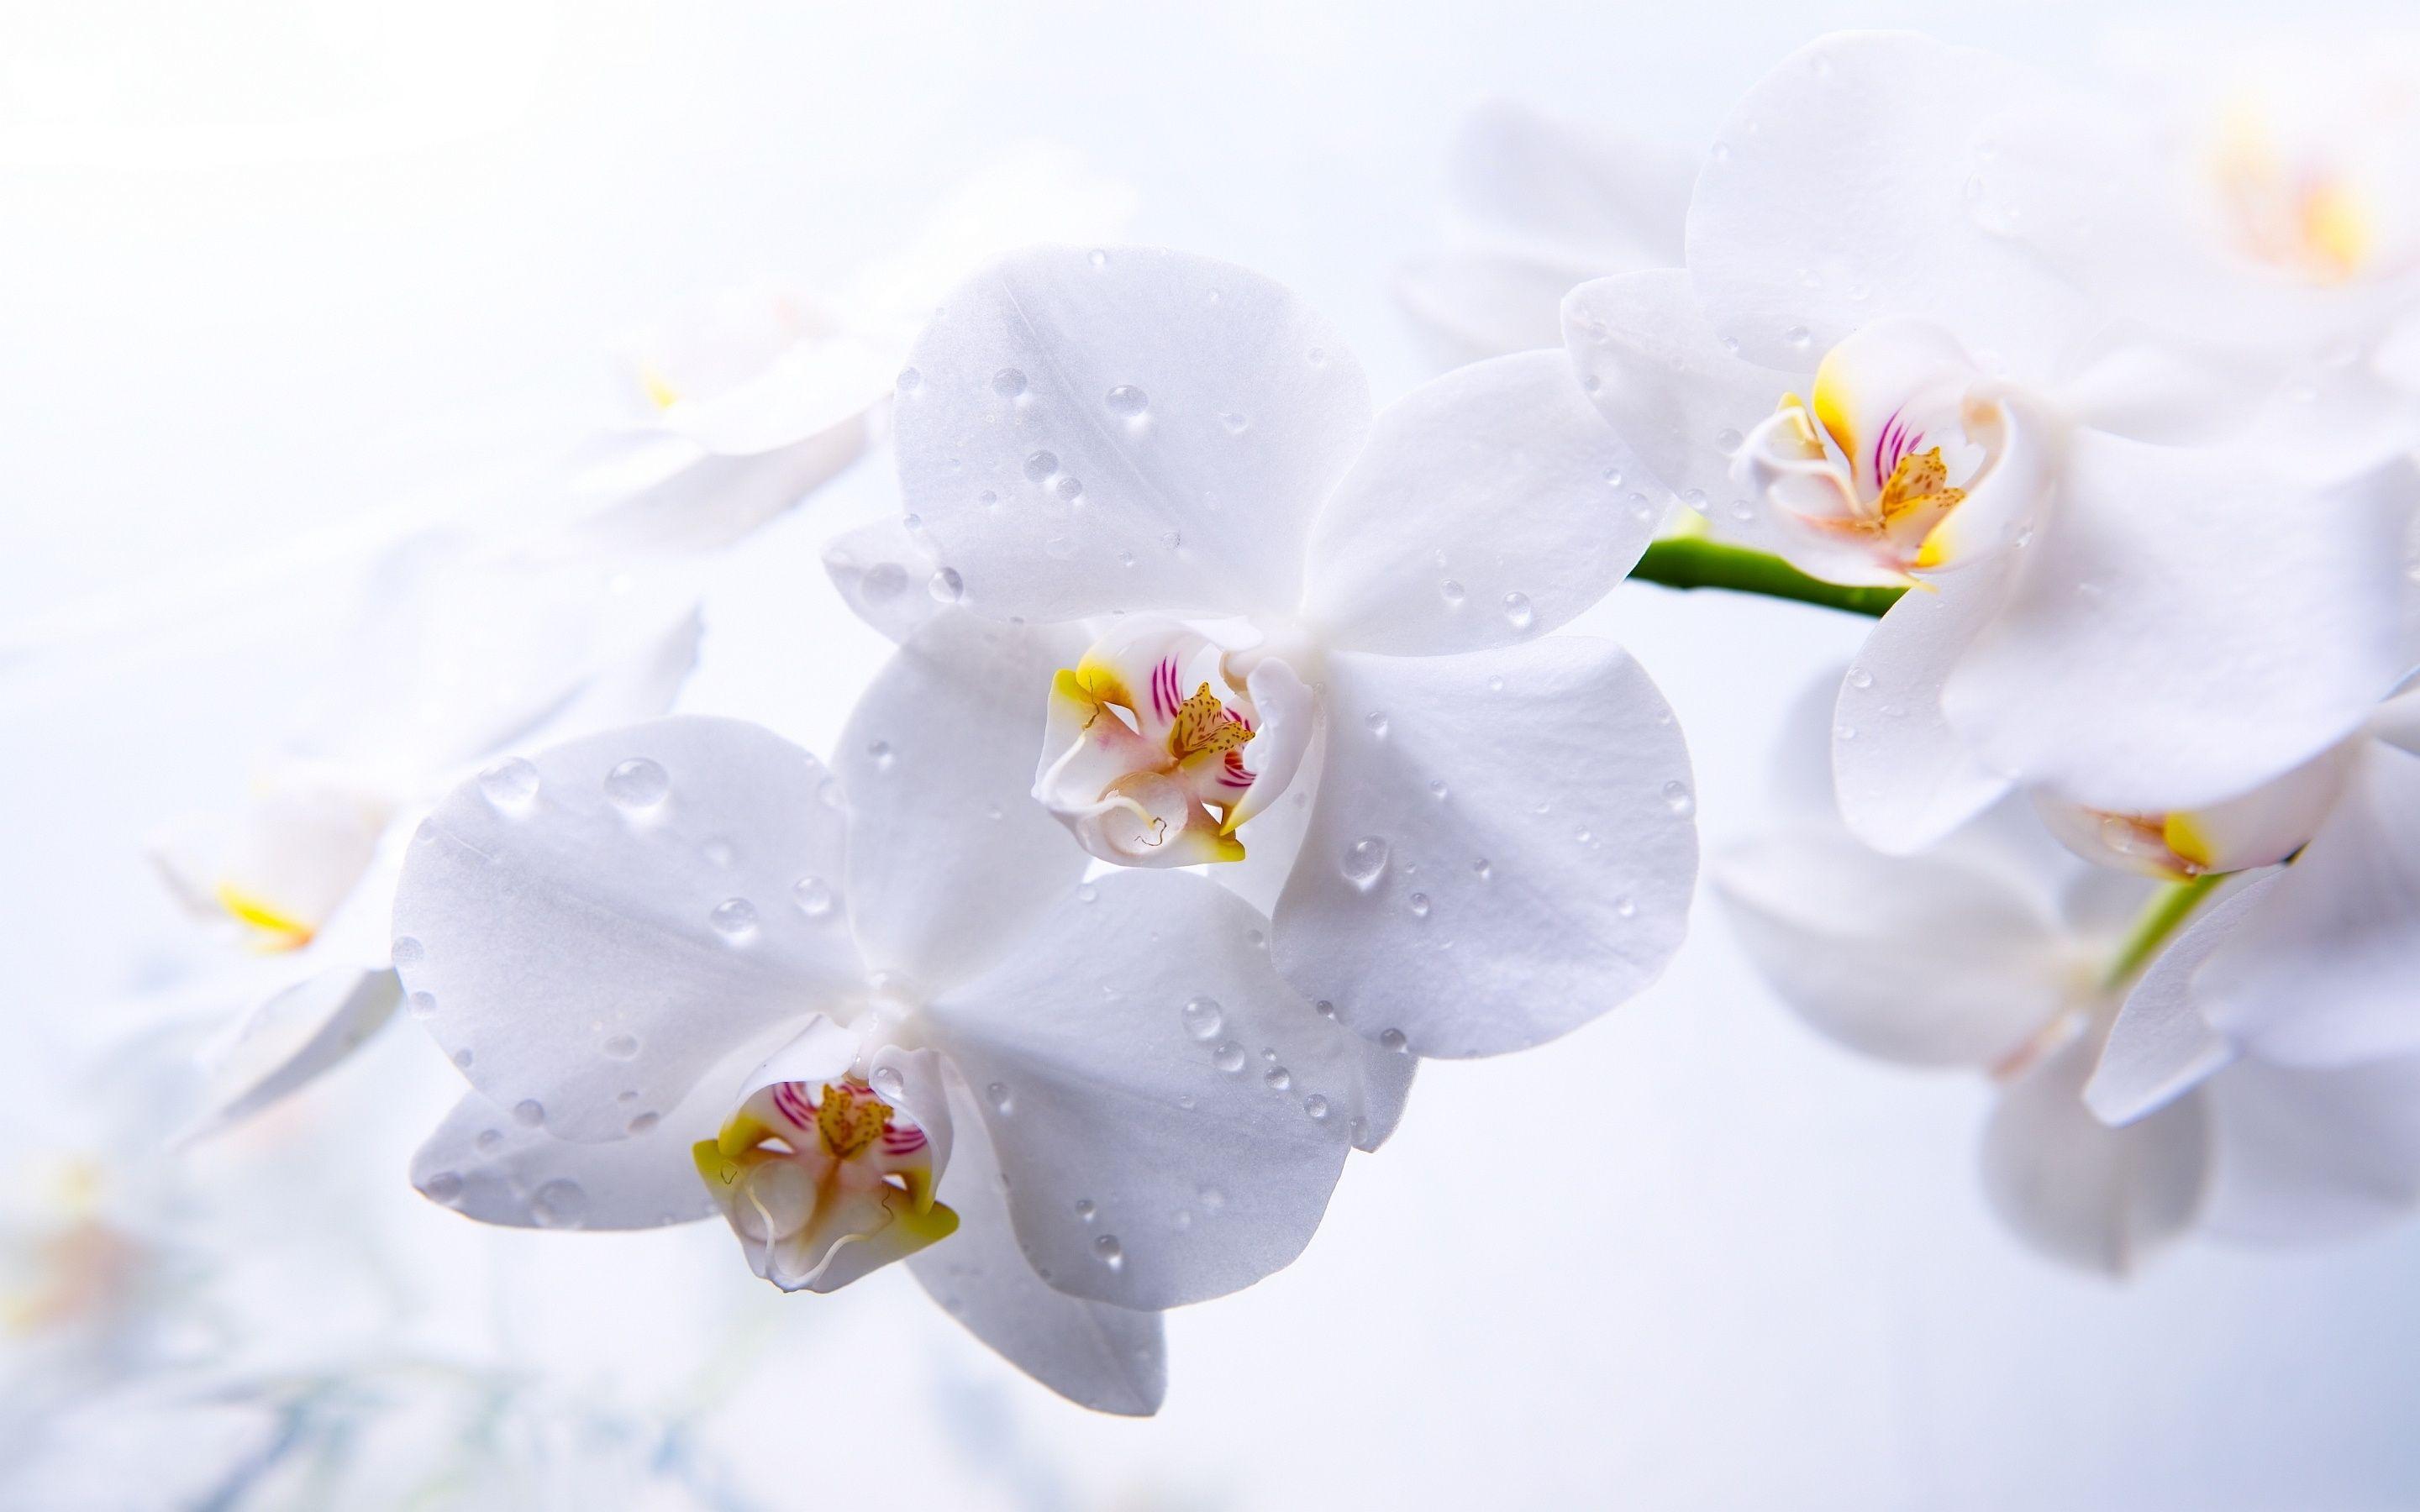 White Orchid Wallpapers - Wallpaper Cave